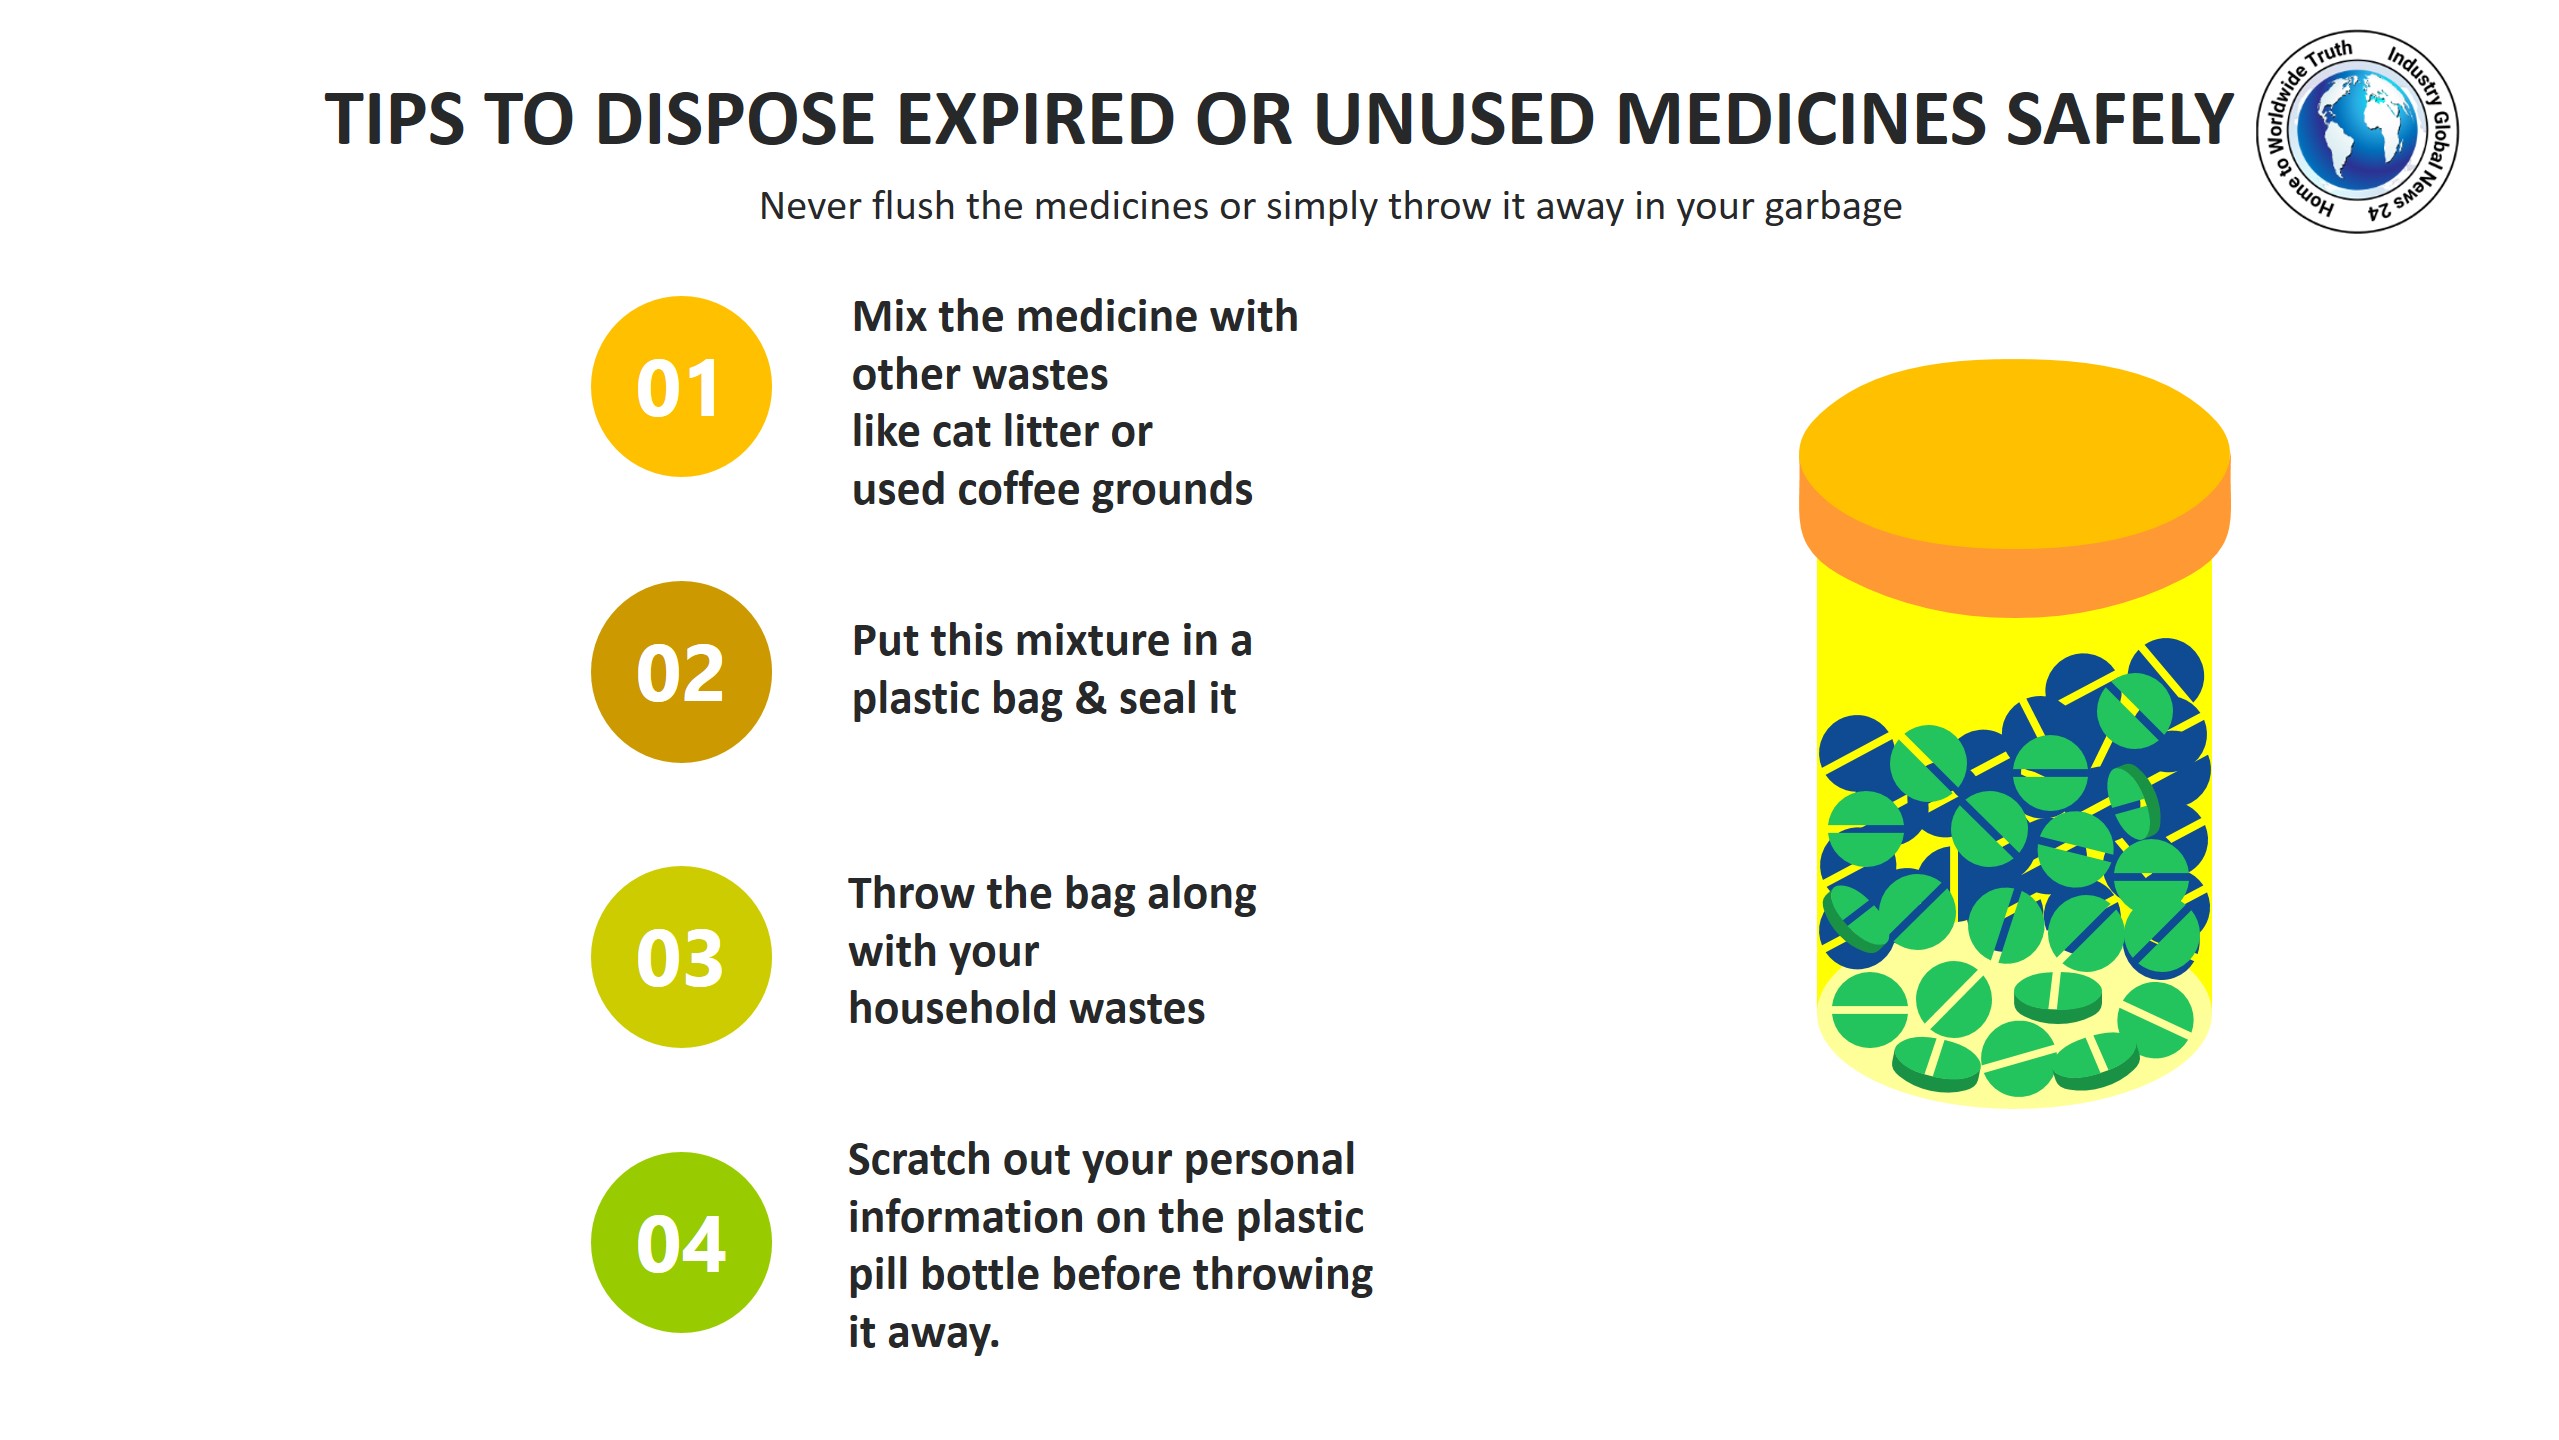 Tips to dispose expired or unused medicines safely